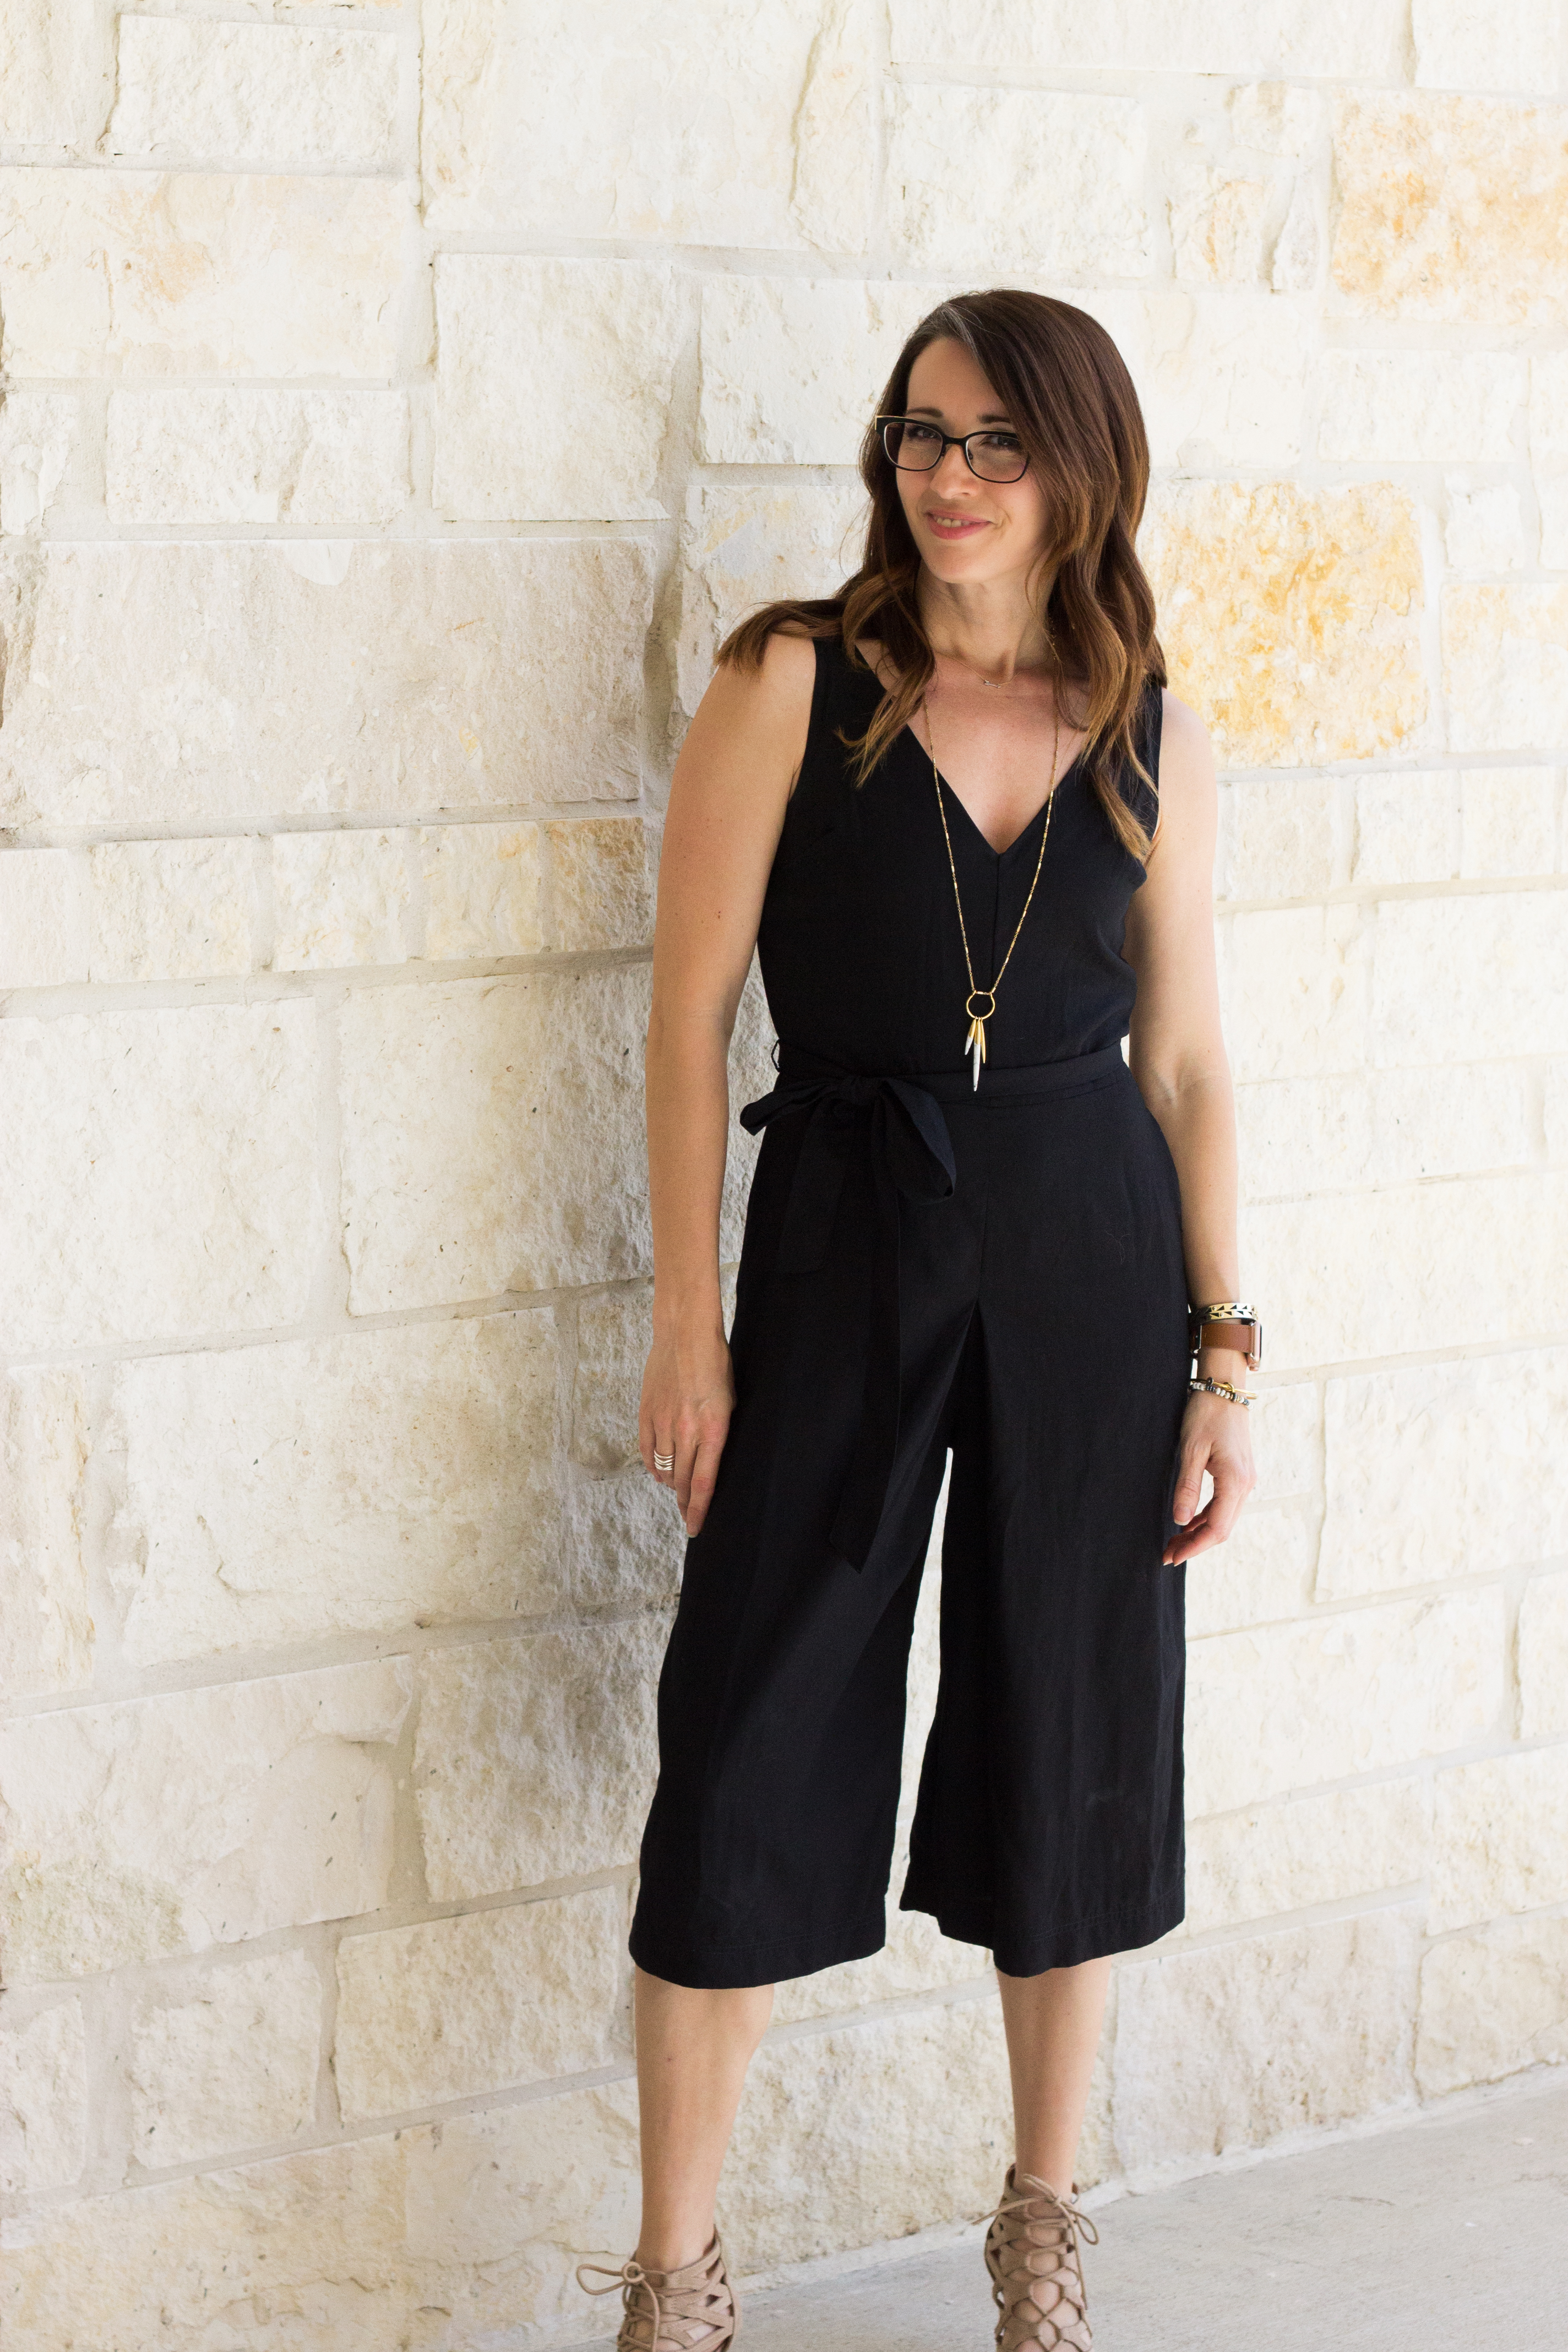 jumpsuit, black, one piece, method39, get dressed, easy, wardrobe stylist, personal stylist, find your style, as seen on me, spring style, mom style, everyday style